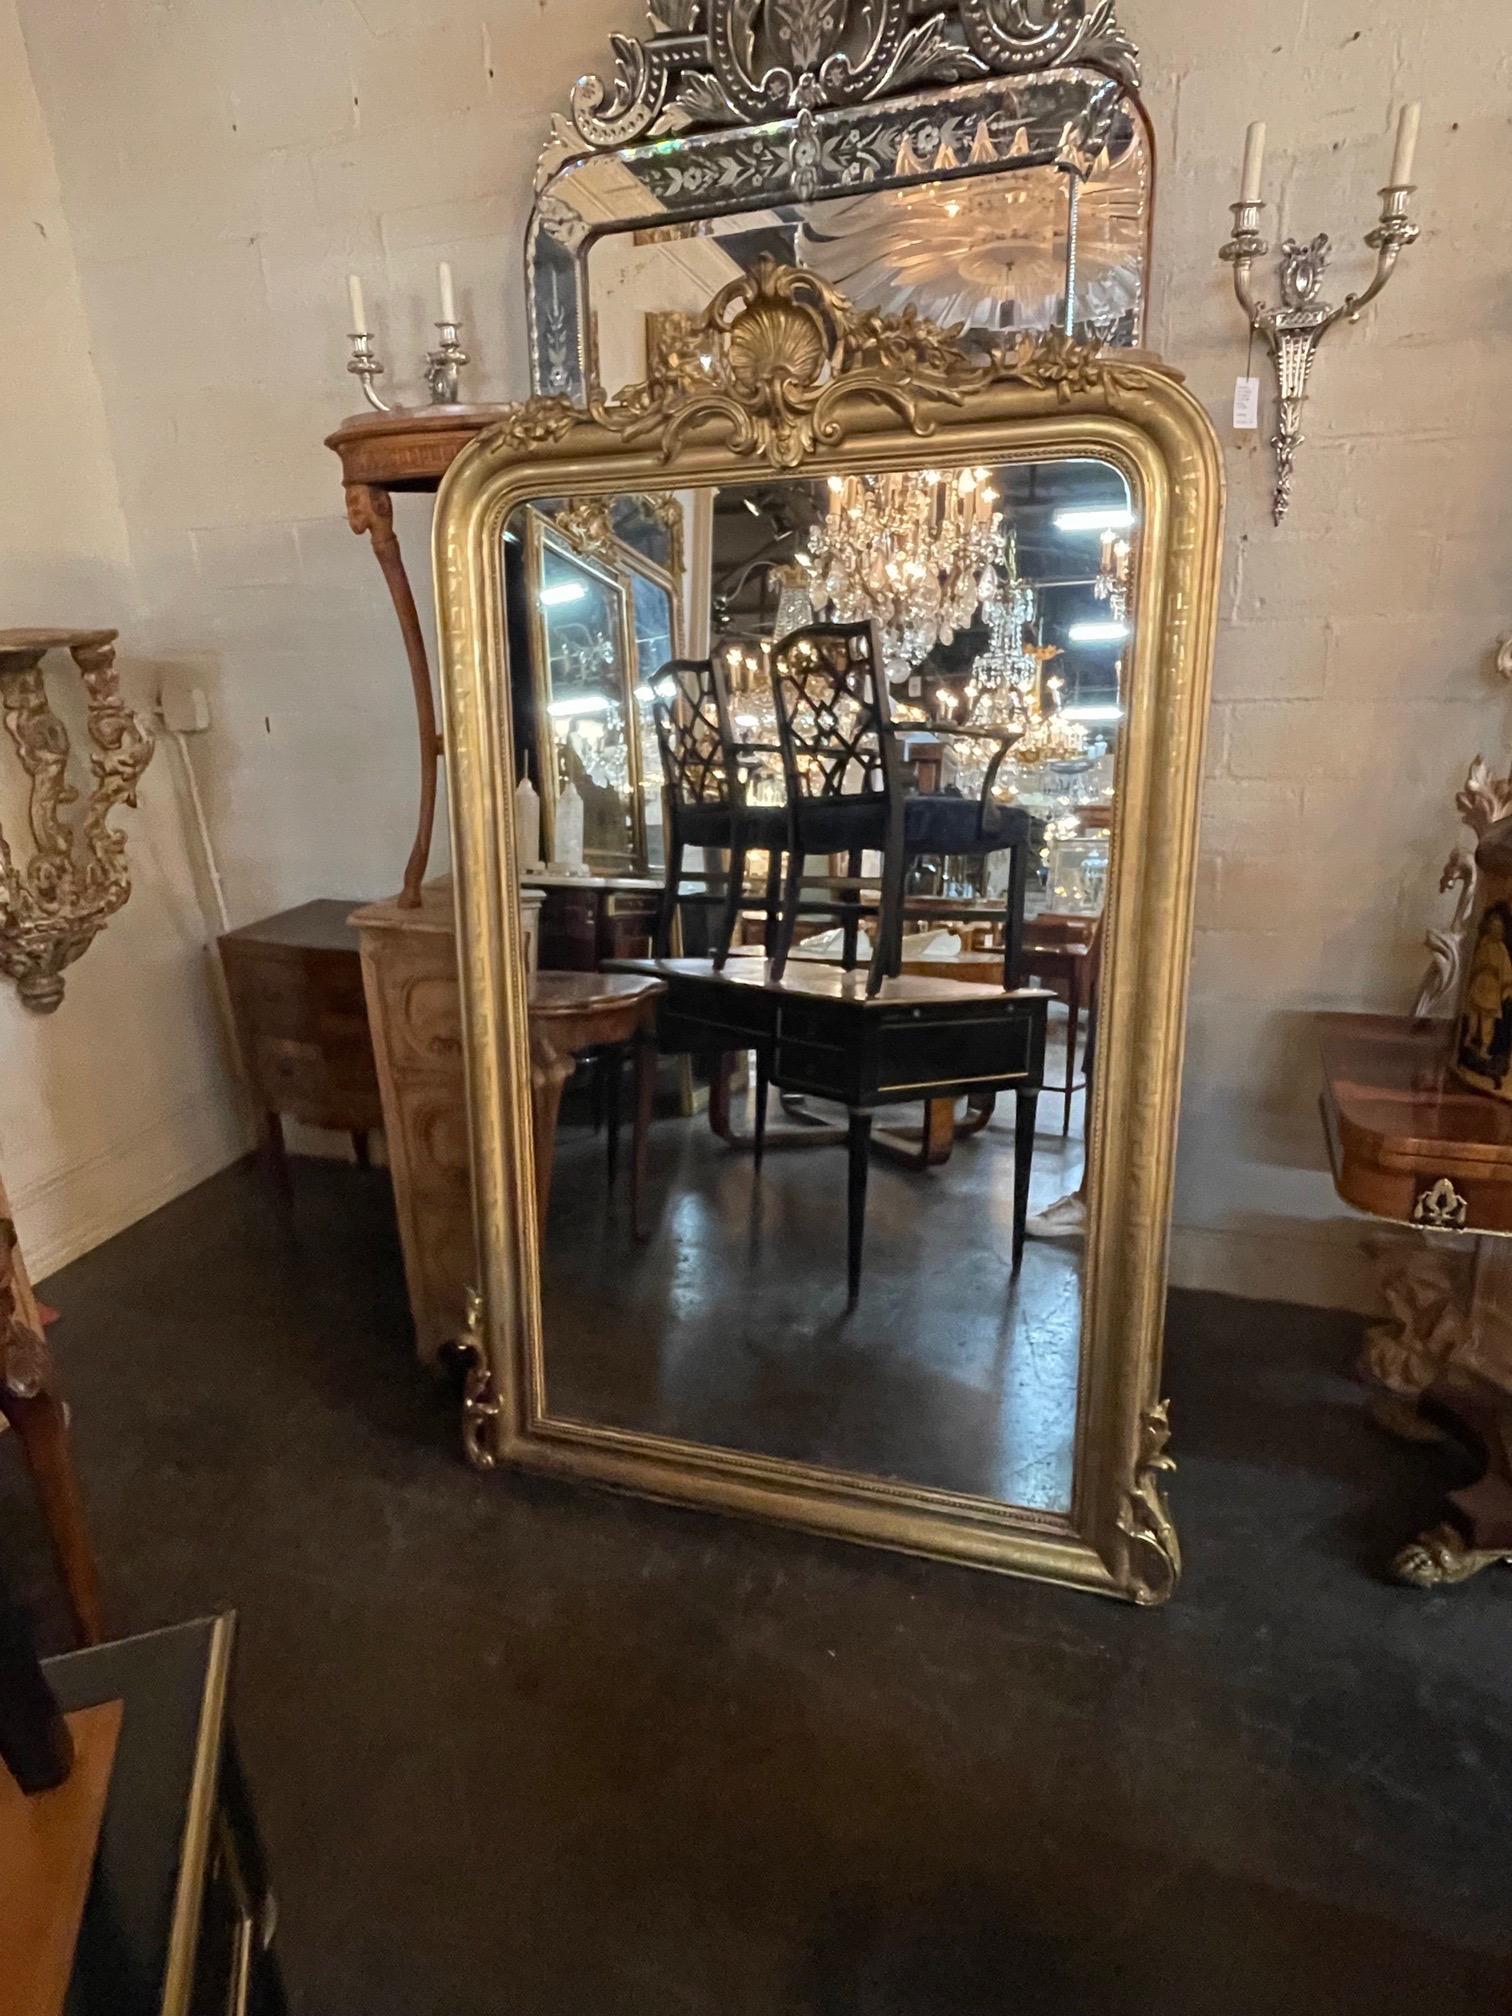 Very fine 19th century French Louis Philippe giltwood mirror with carved crest. This piece also has a pretty pattern on the sides and beaded inner border. Creates a touch of elegance!